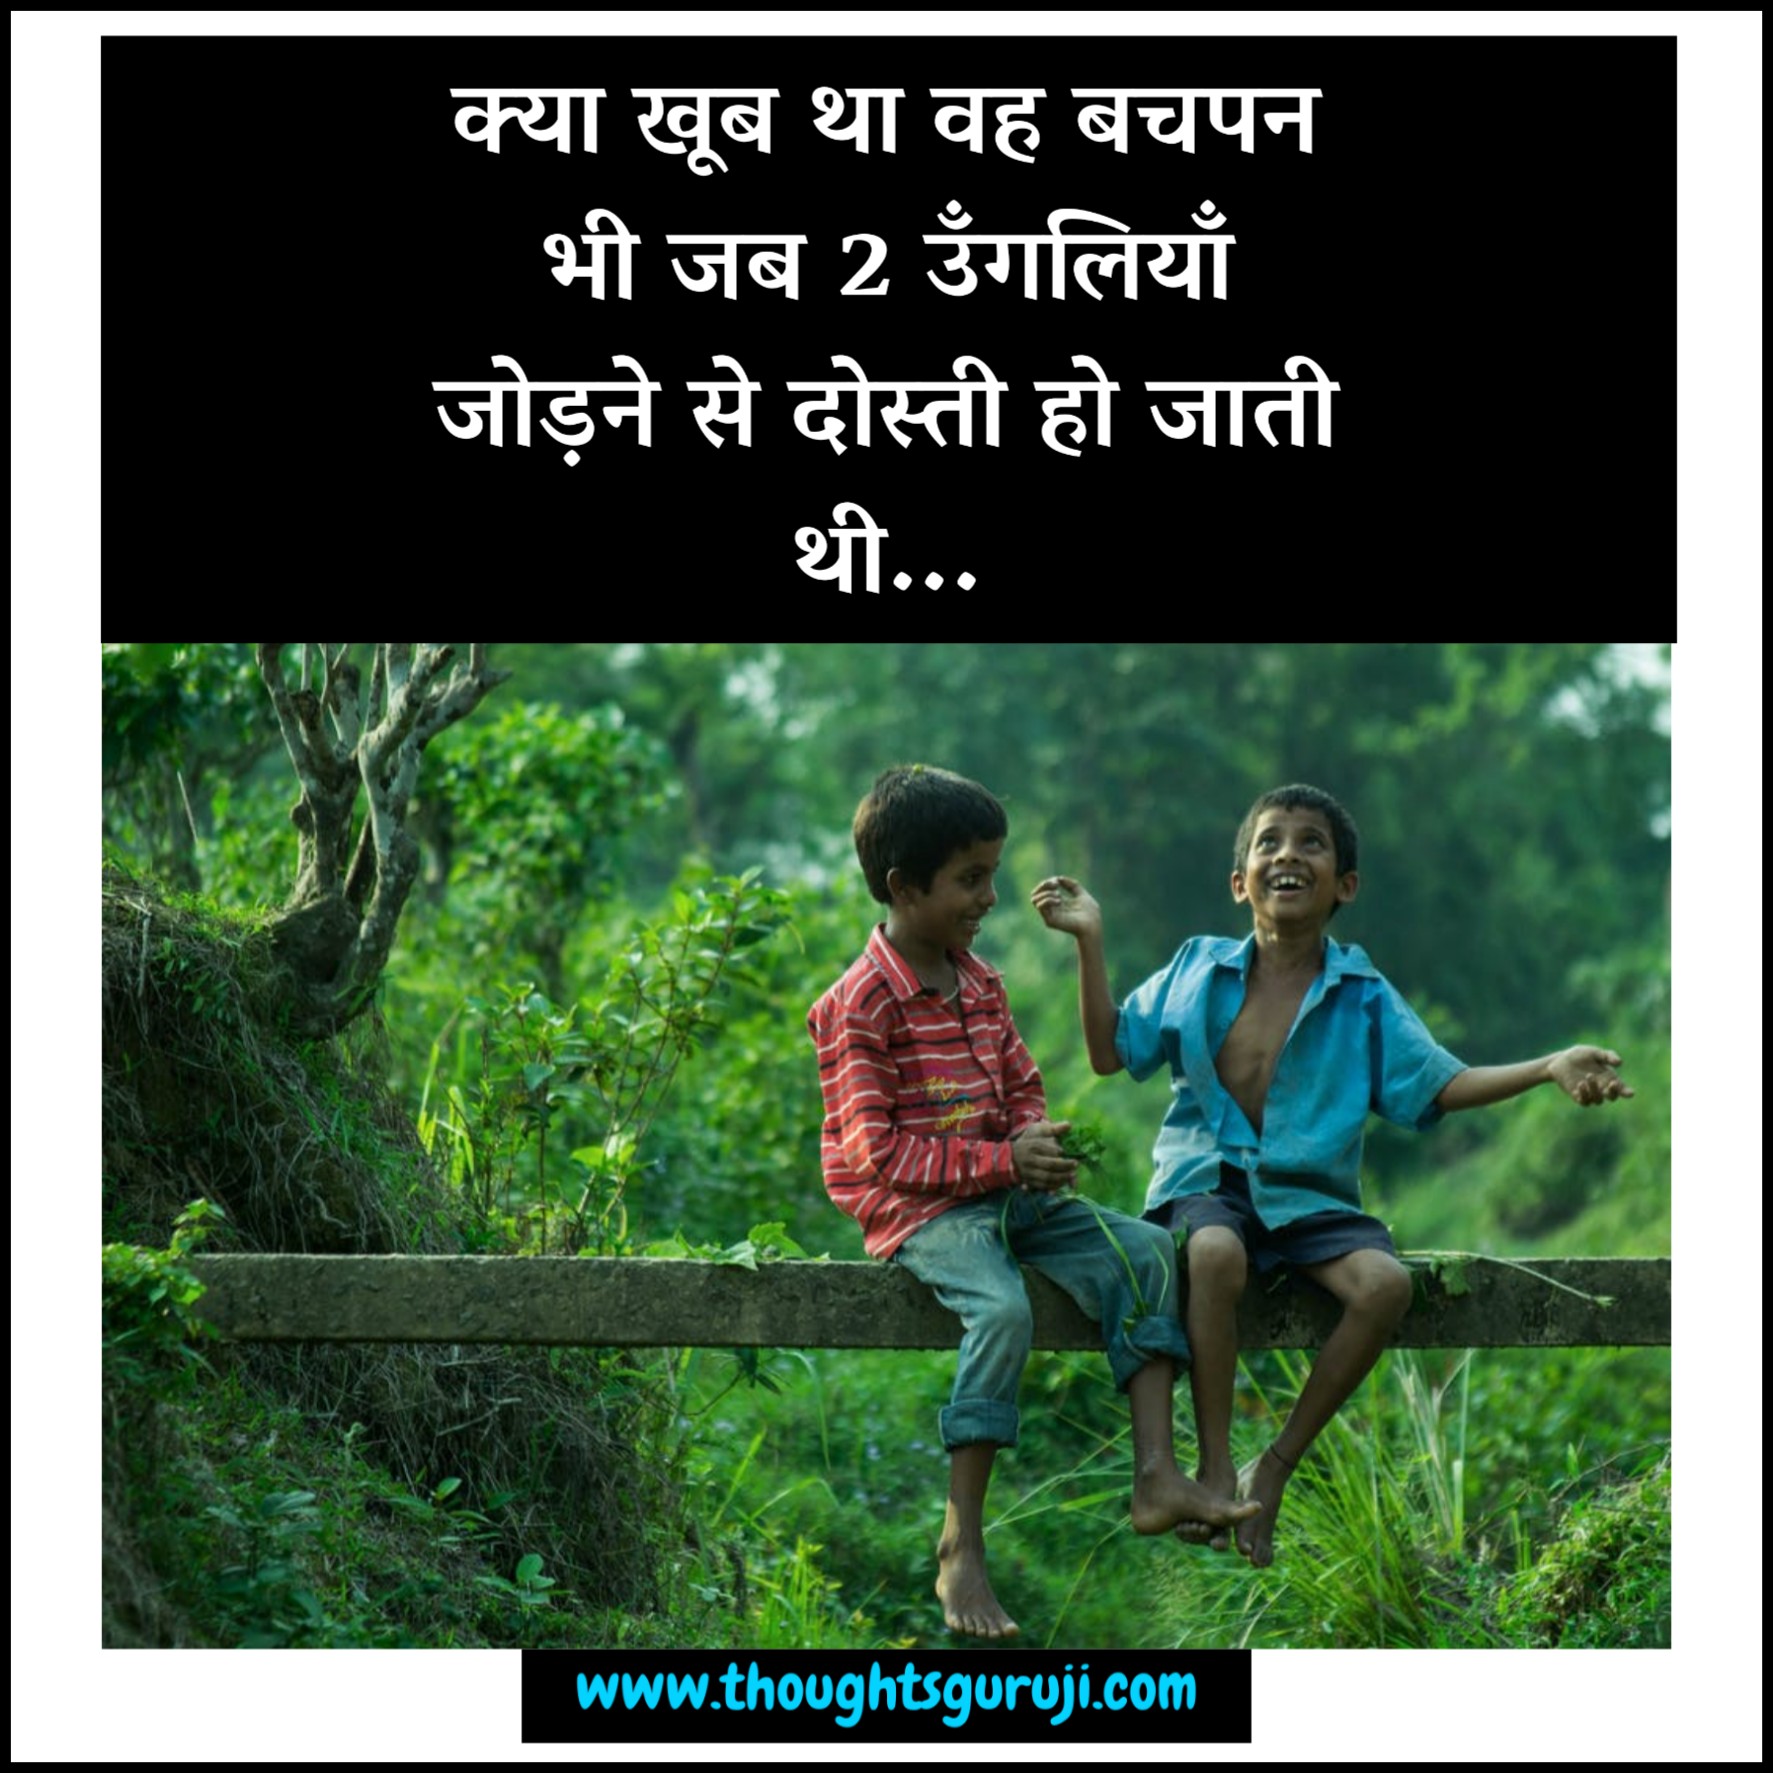 best friends forever sayings in hindi